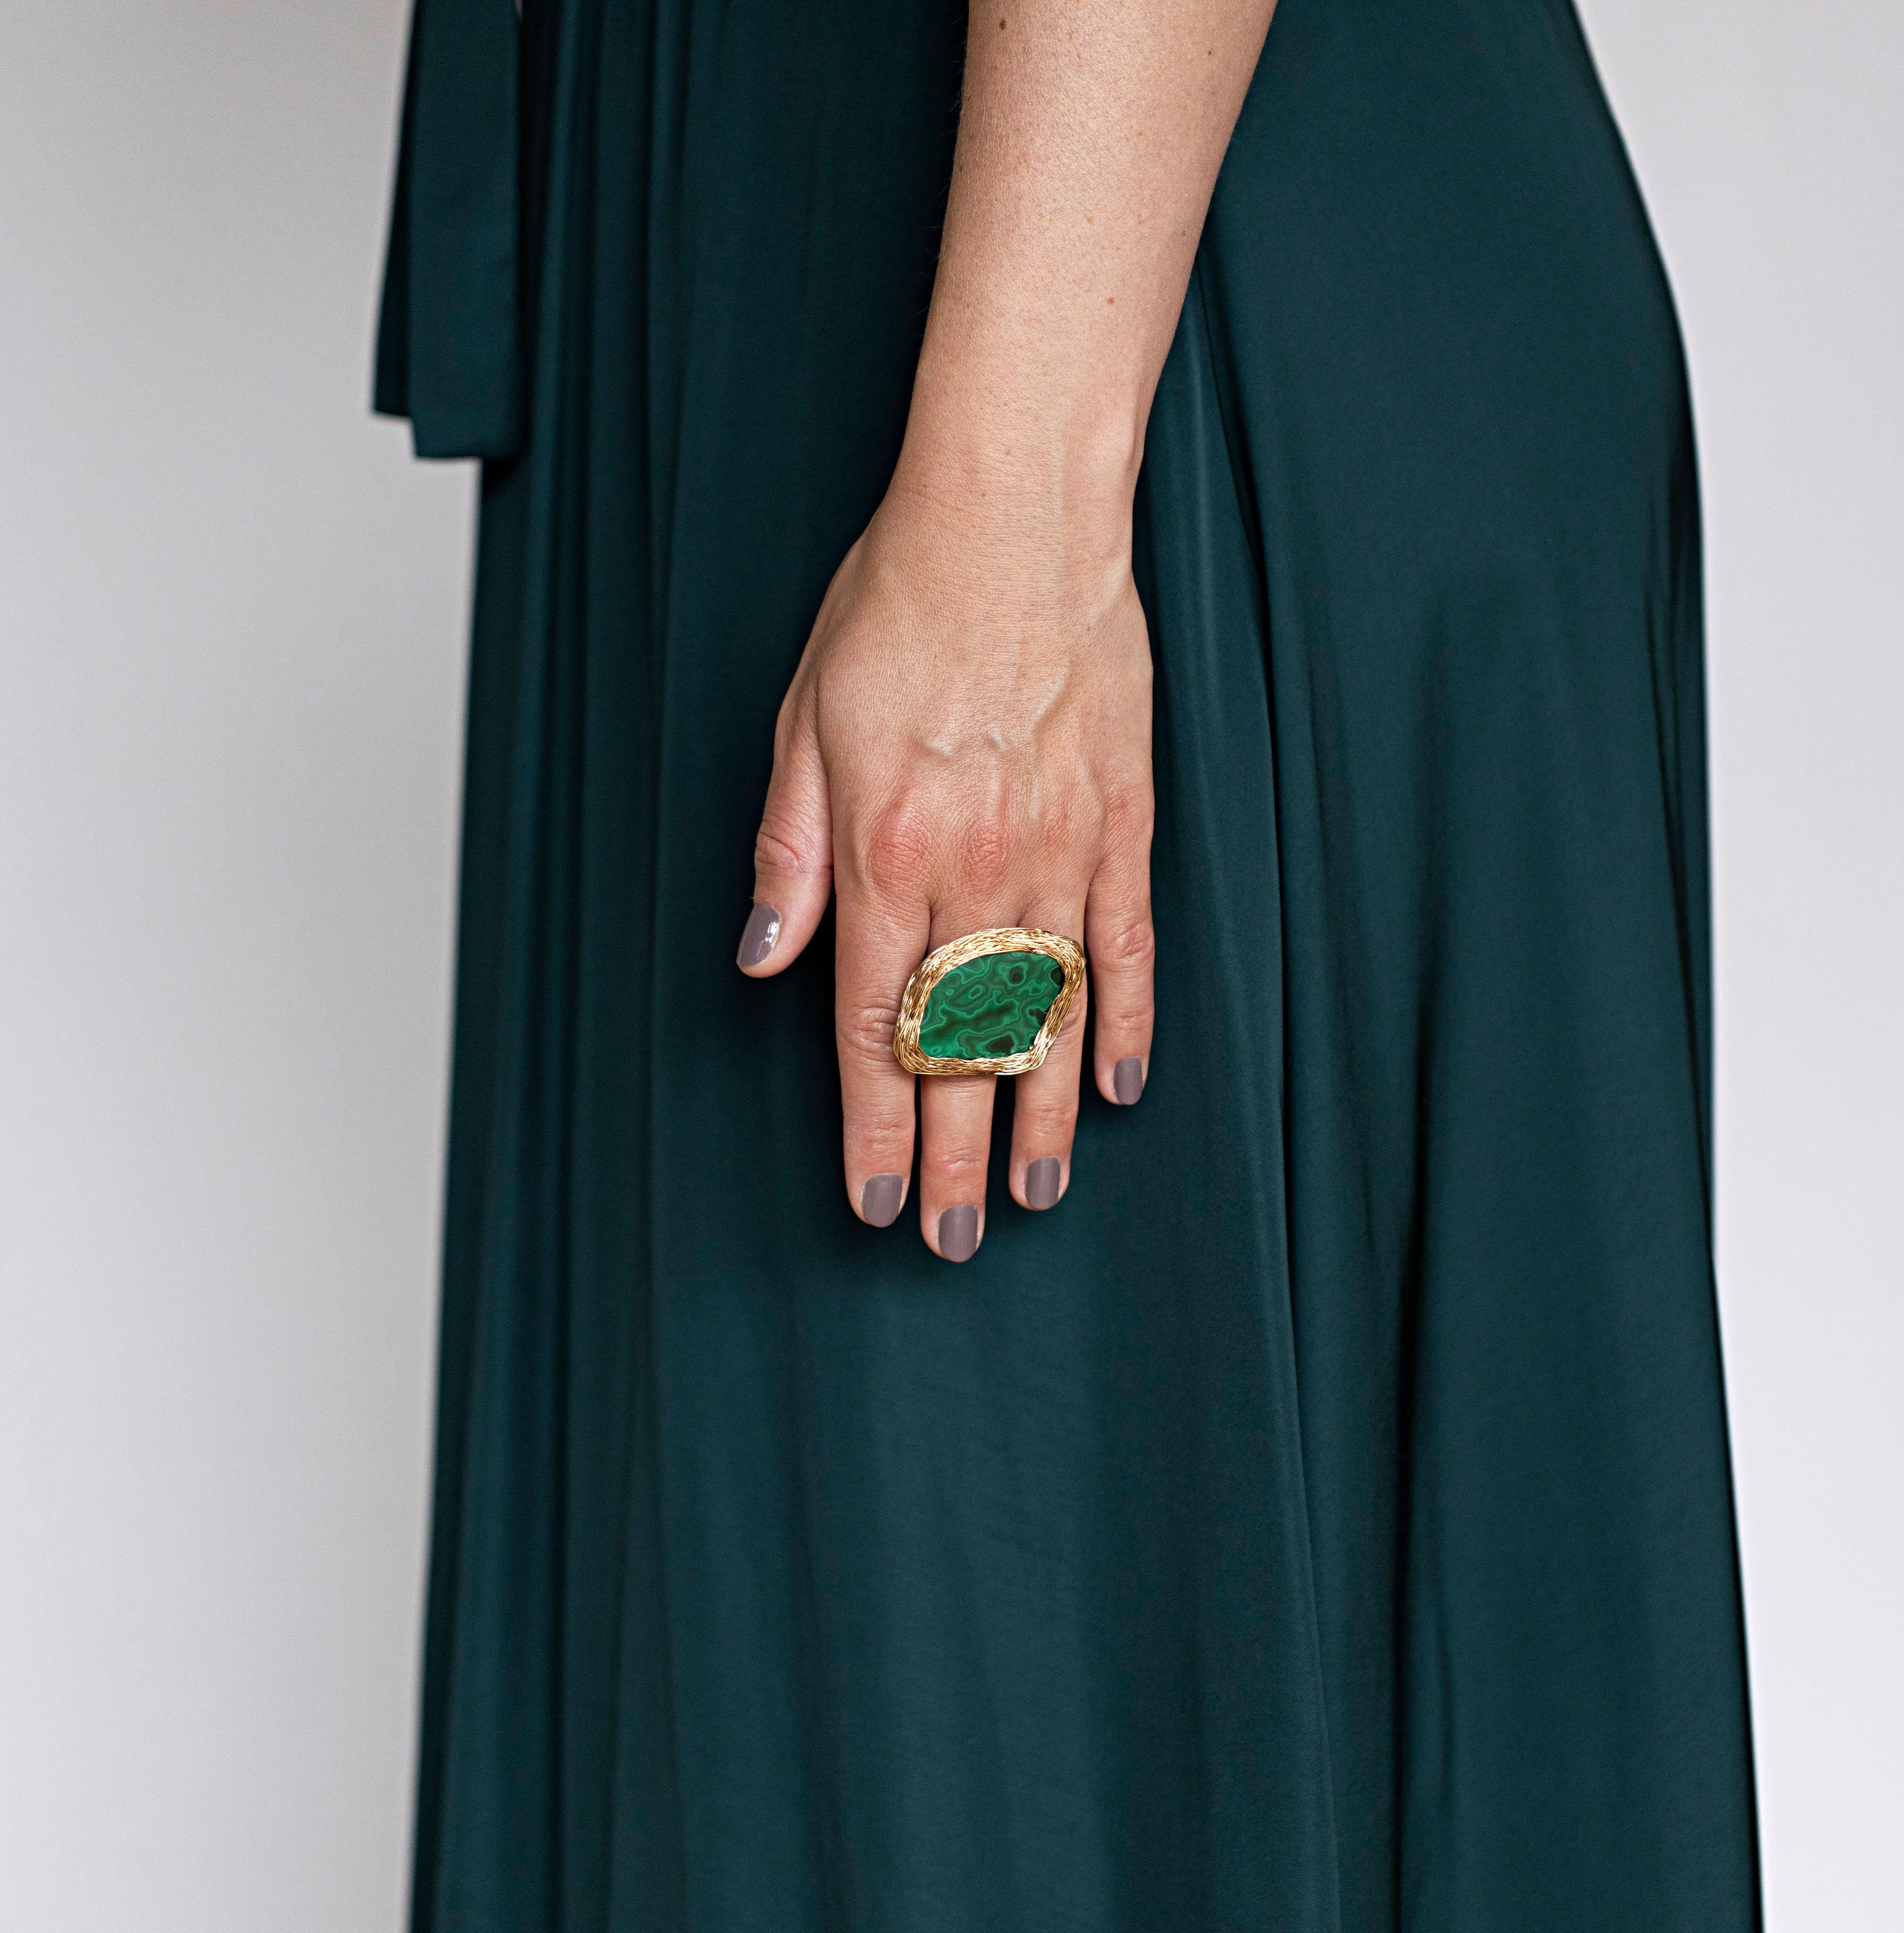 Cushion Cut Greenest Gold and Malachite Statement Cocktail Ring by Sheila Westera London